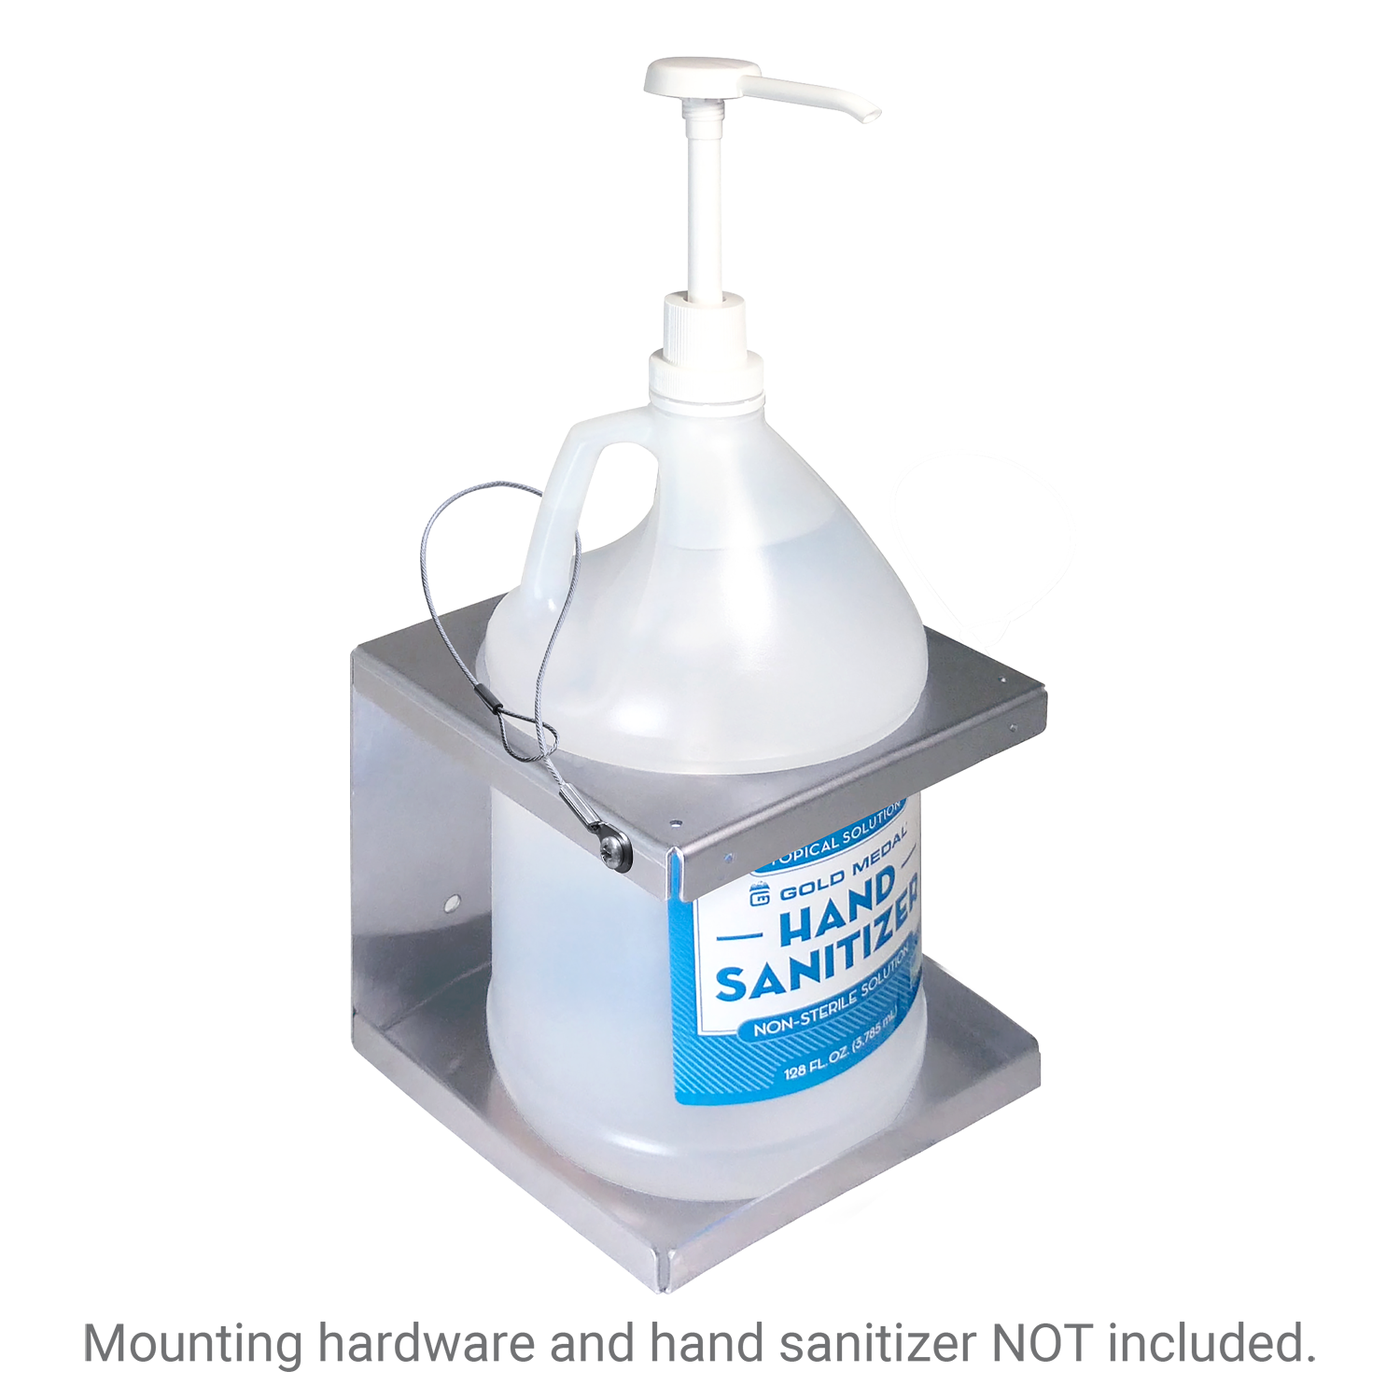 New Hand Sanitizing Stations Added to Gold Medal Safety Product Line